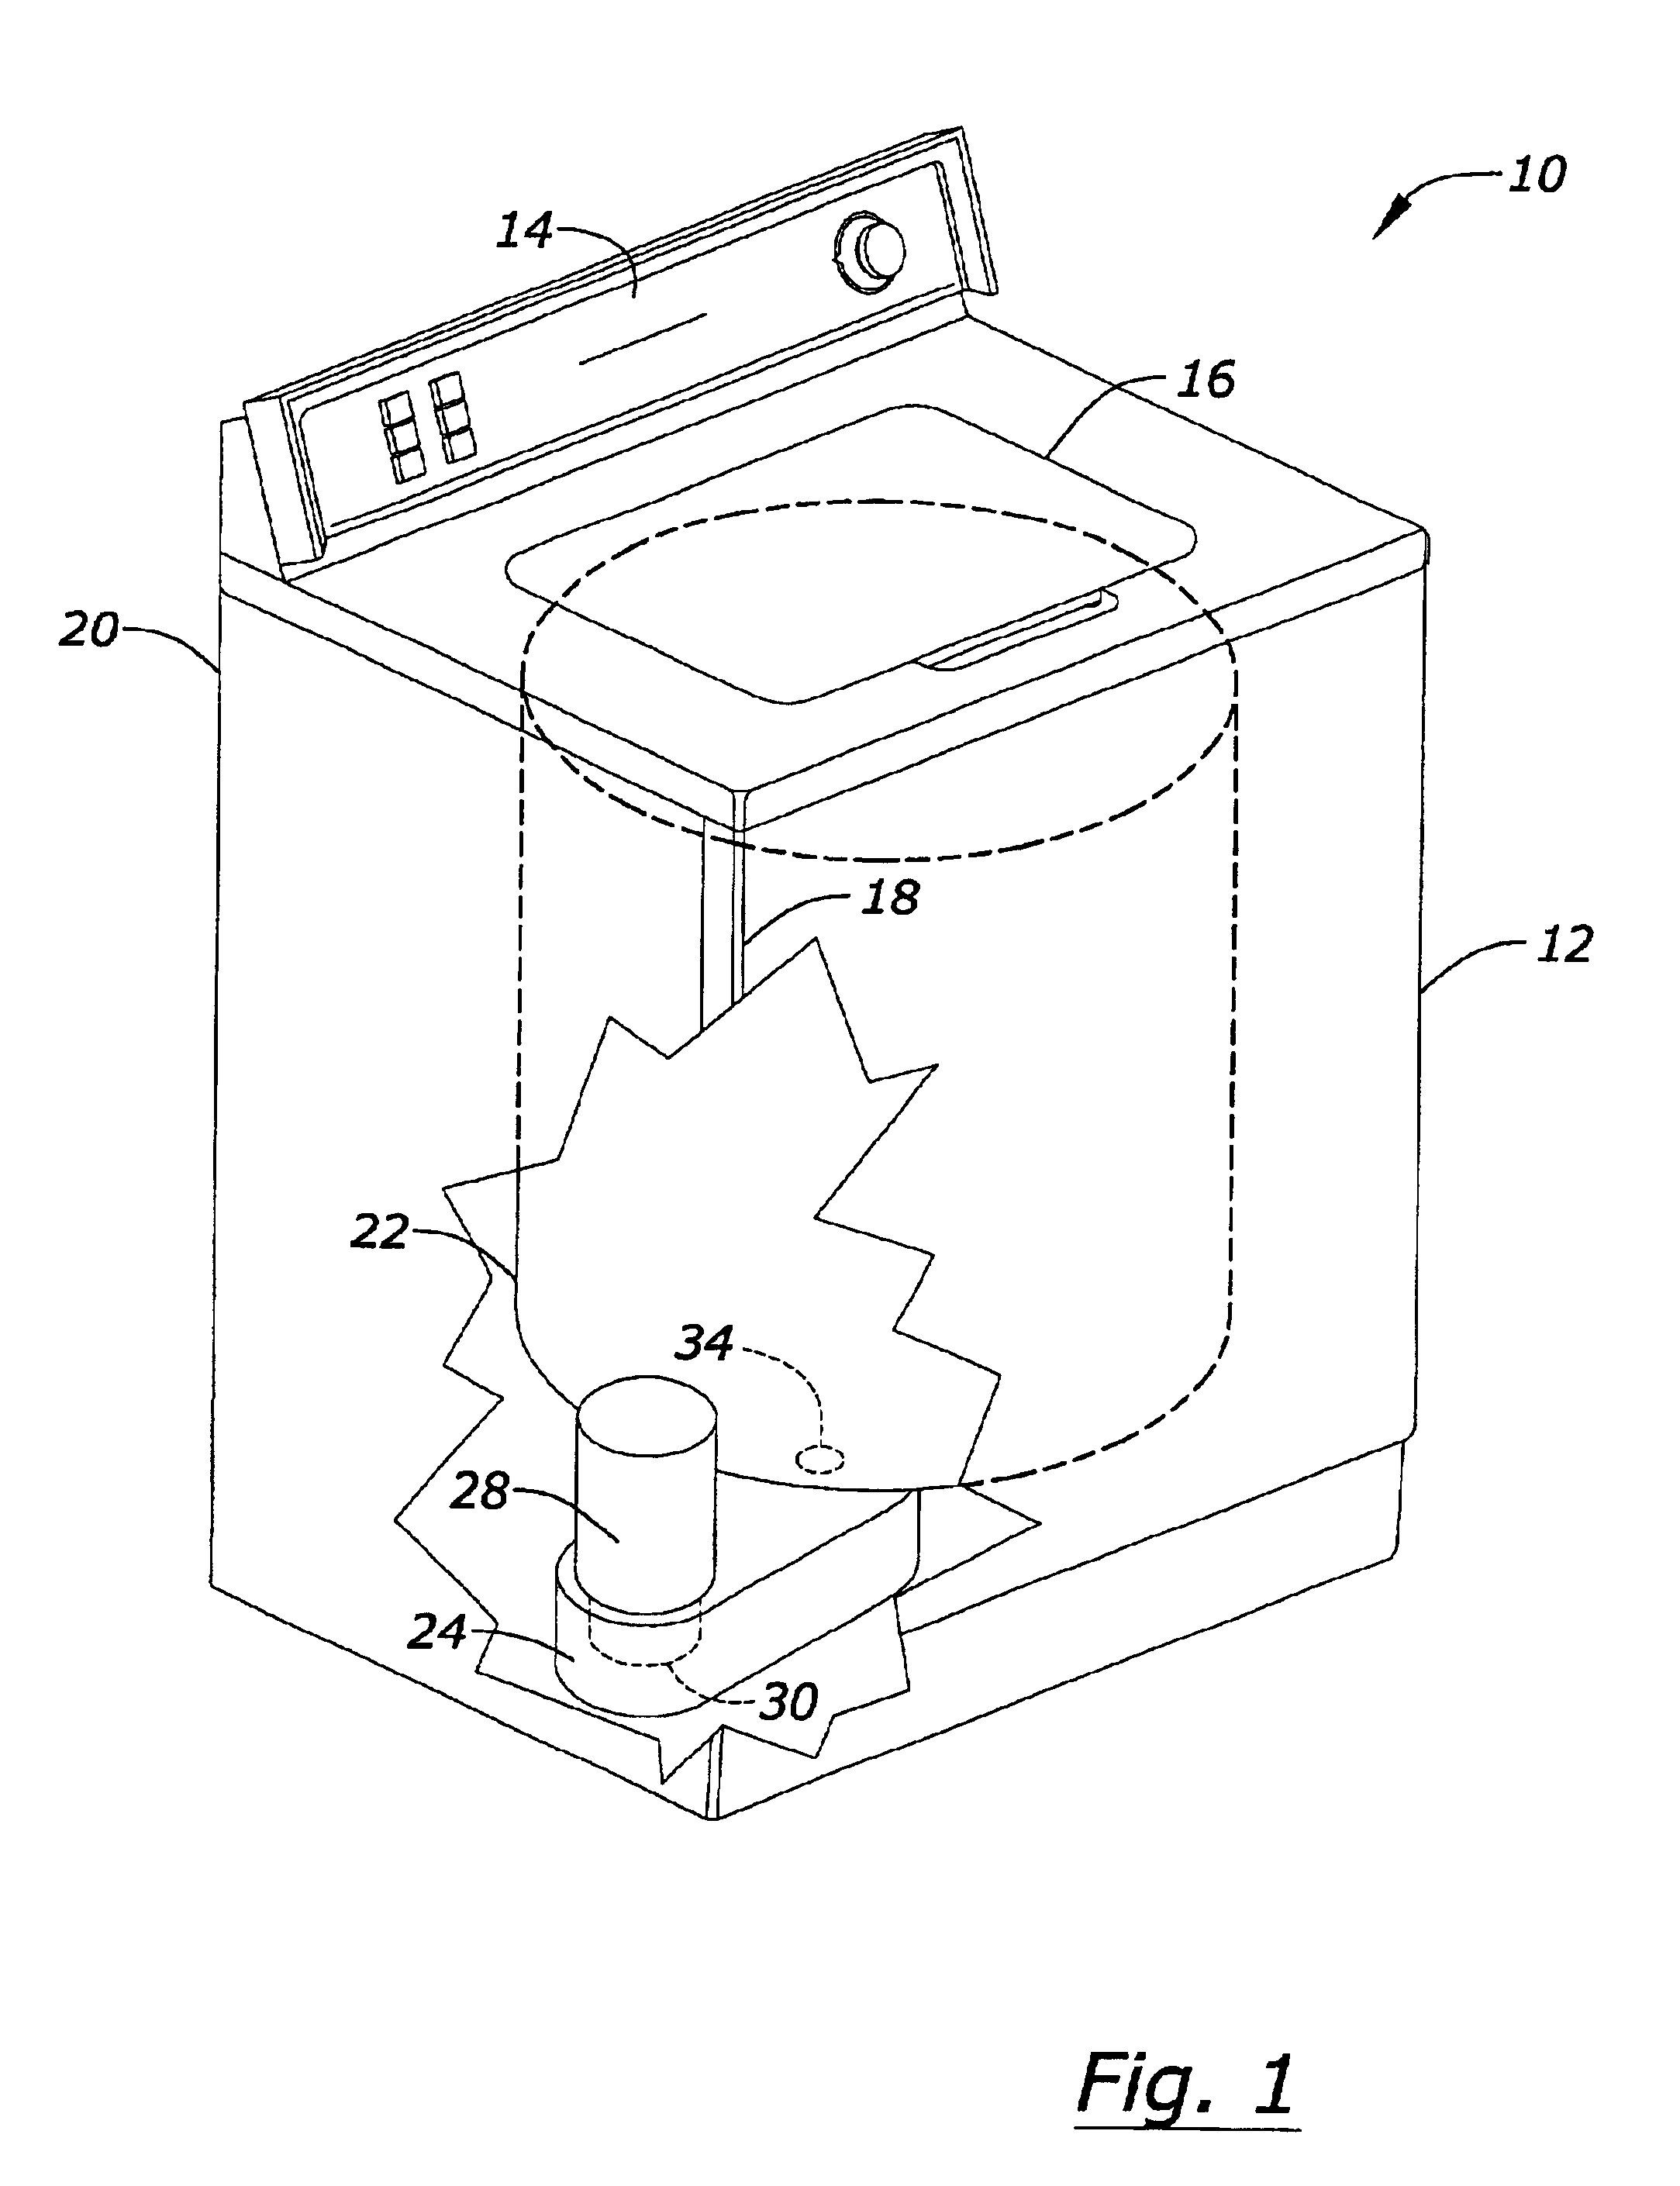 Tub mounted, vertically oriented pump